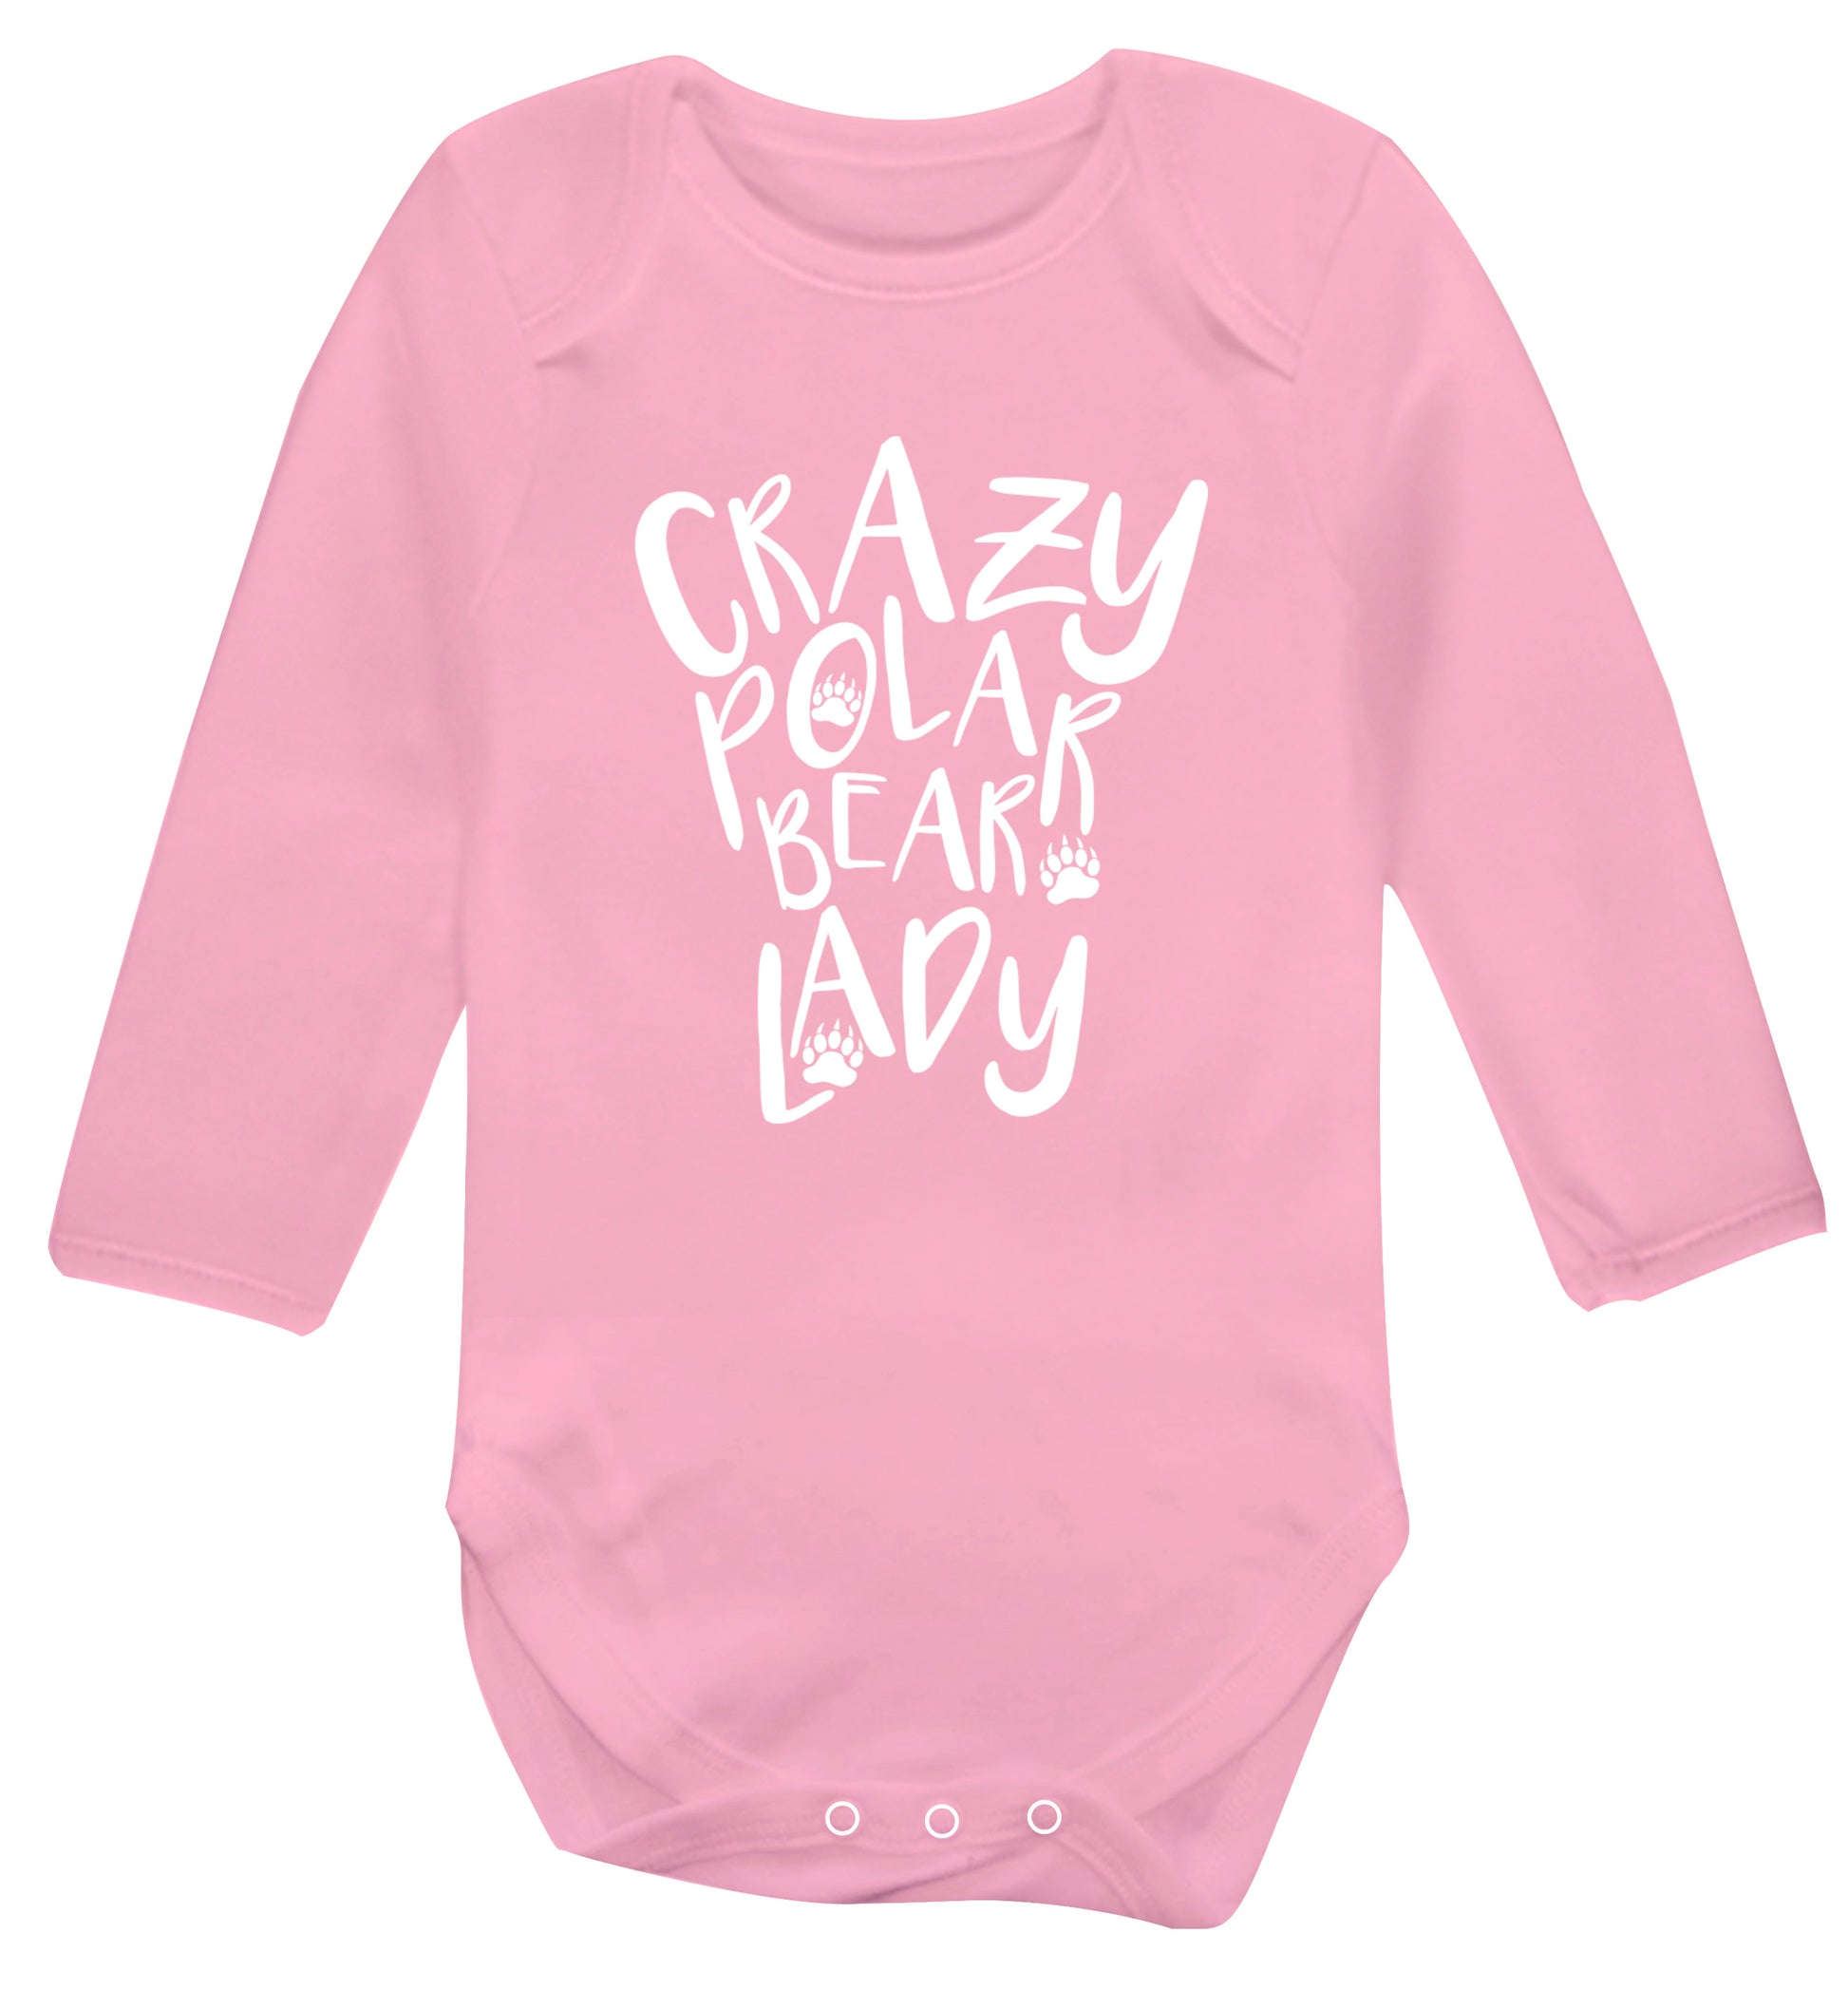 Crazy polar bear lady Baby Vest long sleeved pale pink 6-12 months